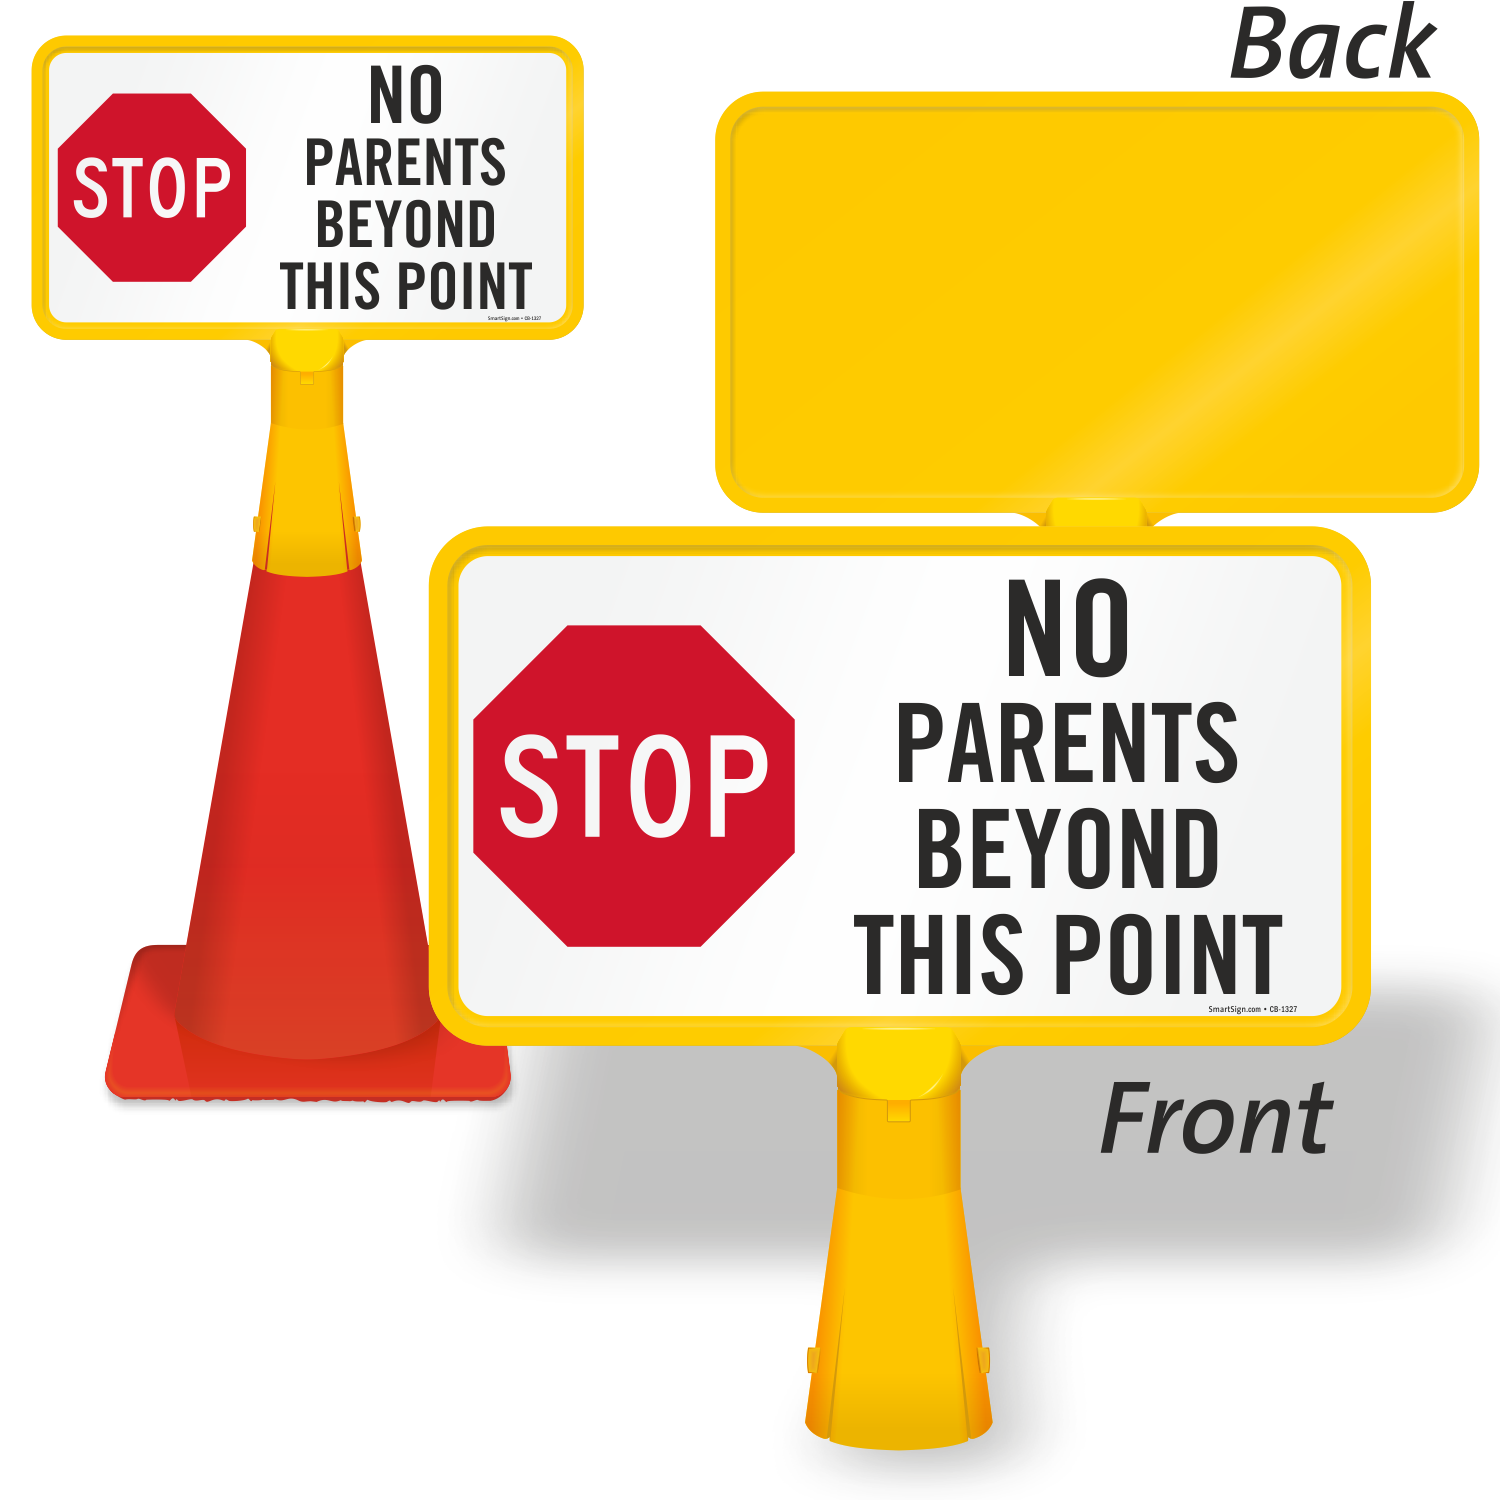 Stop No Parents Beyond This Point ConeBoss Sign, SKU: CB-1327